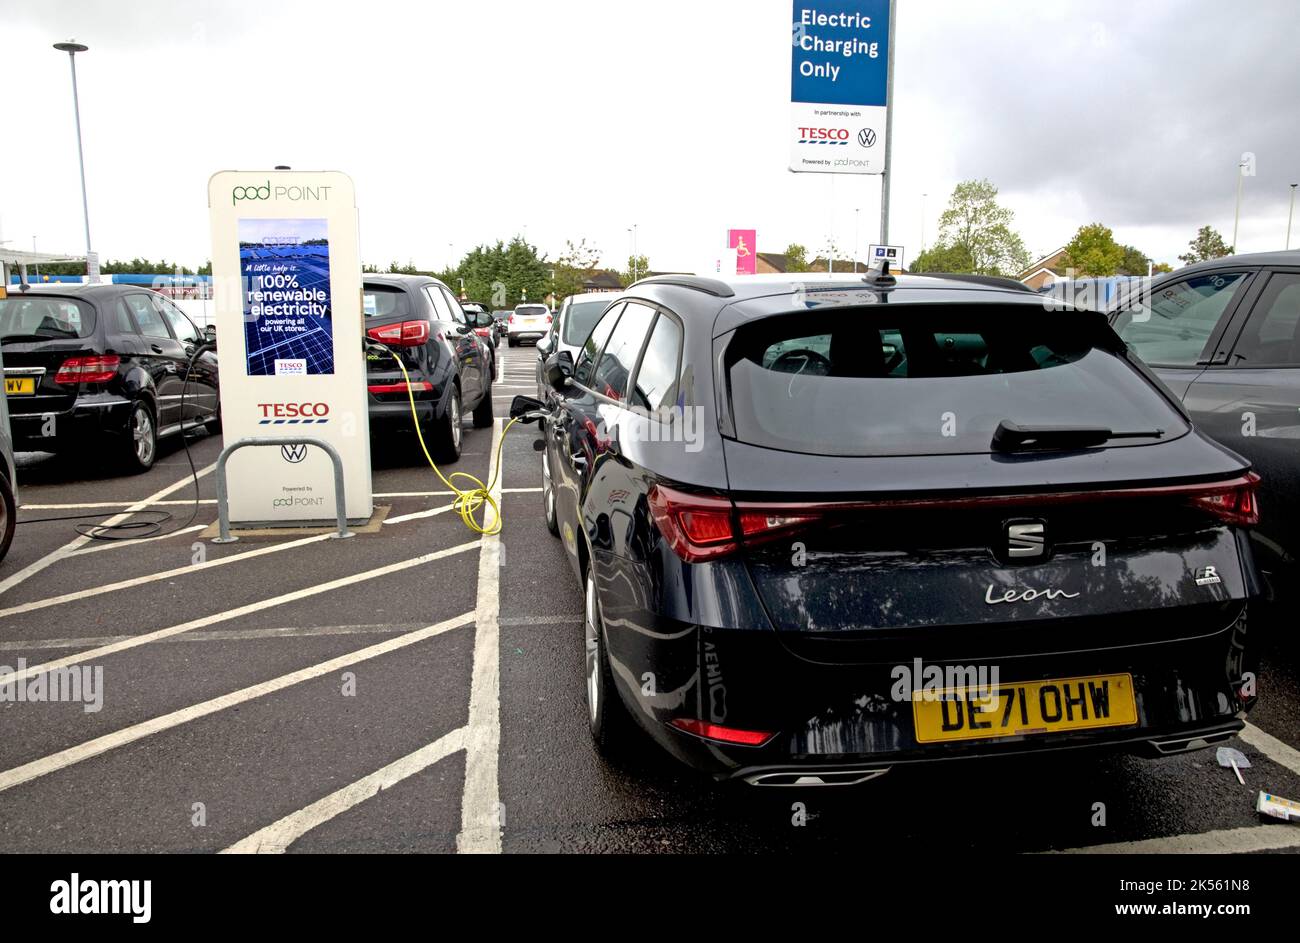 Two electric vehicles charging at Tesco free 7kW charging points using 100% renewable electricity at Quedgely Gloucester UK Stock Photo